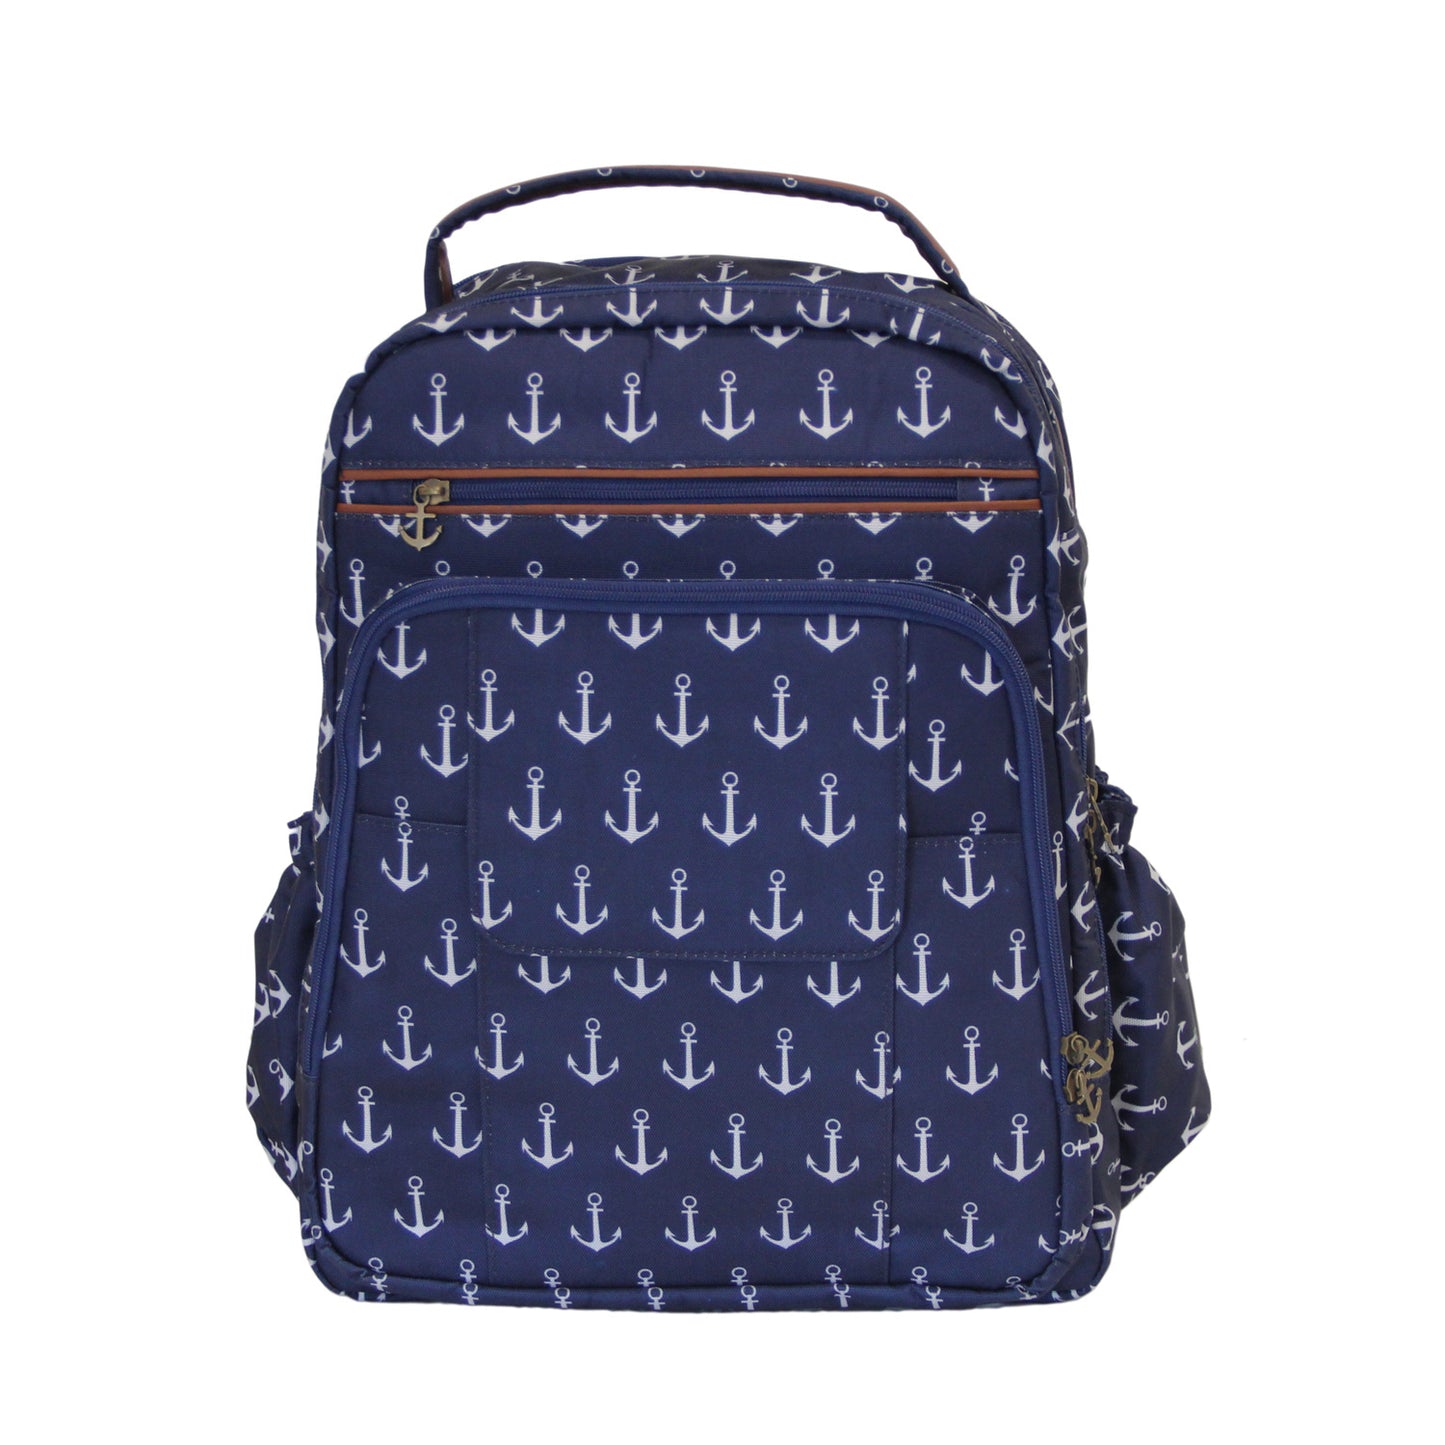 Anchor Print Backpack